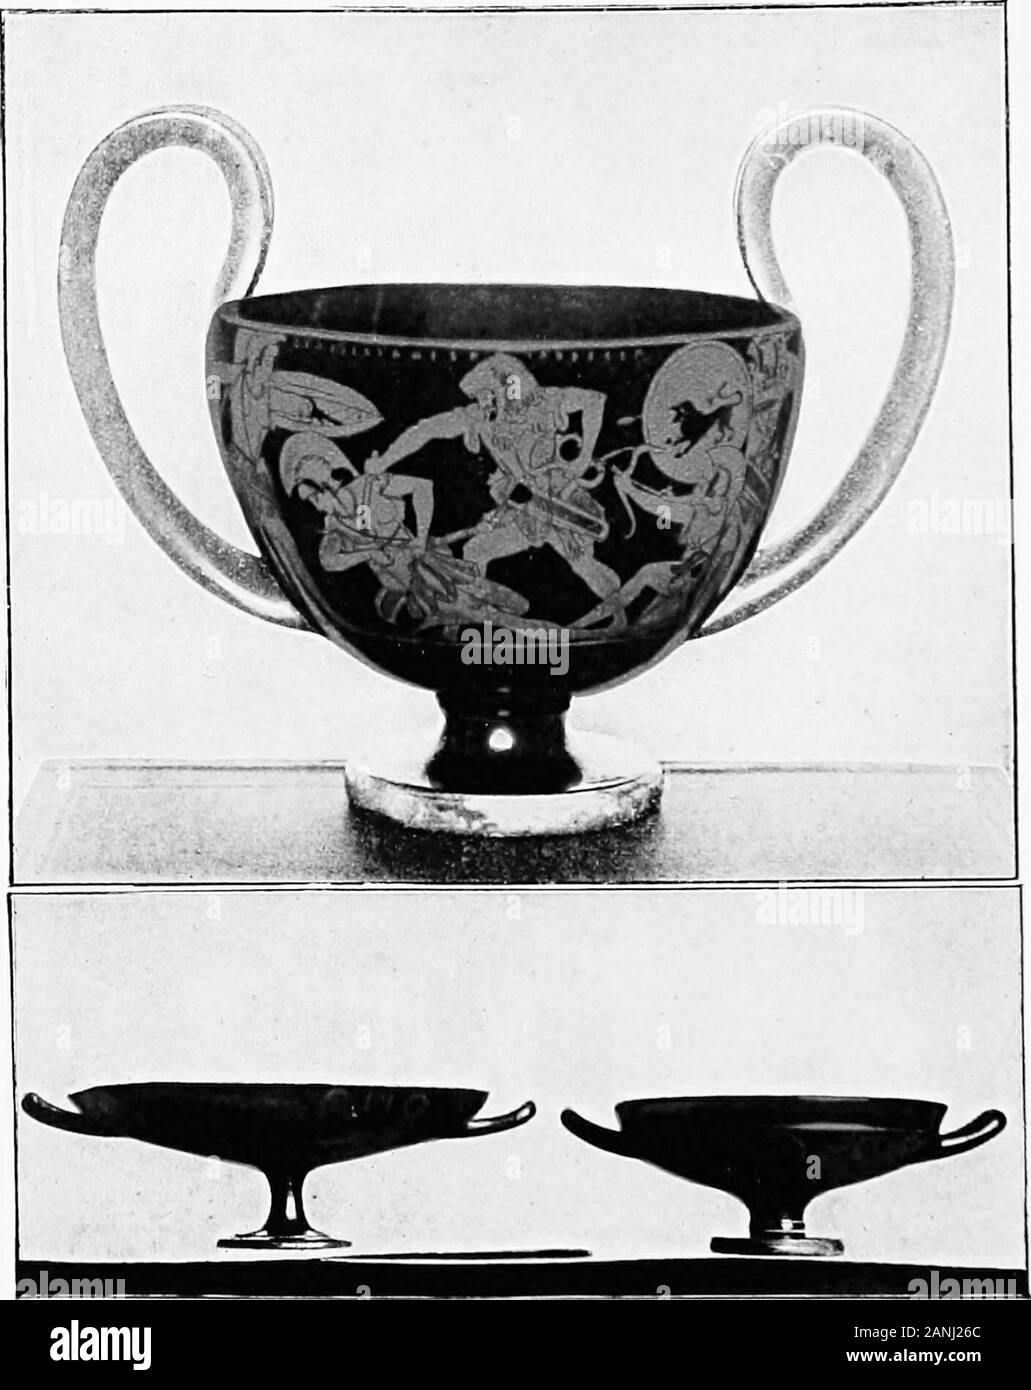 Douris and the painters of Greek vases . H.. I. KAN I HAKdS Nl) K&gt; I.I Unp). Hy l)(uiii. Itnissi-ls inul I.imimc Mviscmns, DOURIS AND THE PAINTERS OF GREEK VASES BY EDMOND EpTTIER MBMBRB DE LINSTITUT TRANSLATED BY BETTINA KAHNWEILER WITH A PREFACE BYJANE ELLEN HARRISON IIOH.D.LITT.DURHAM. HON.LL.D.ABERDEEN LONDONJOHN MURRAY, ALBEMARLE STREET, W. 1909 3i DEDICATED IN LOVE AND GRATITUDE TO AtTGUST LEWIS PREFACE The translator of M, Pottiers monograph onDouris has kindly asked me to write, by wayof preface, a few words on the relation of Greekvase-painting to Greek literature and to Greek Stock Photo